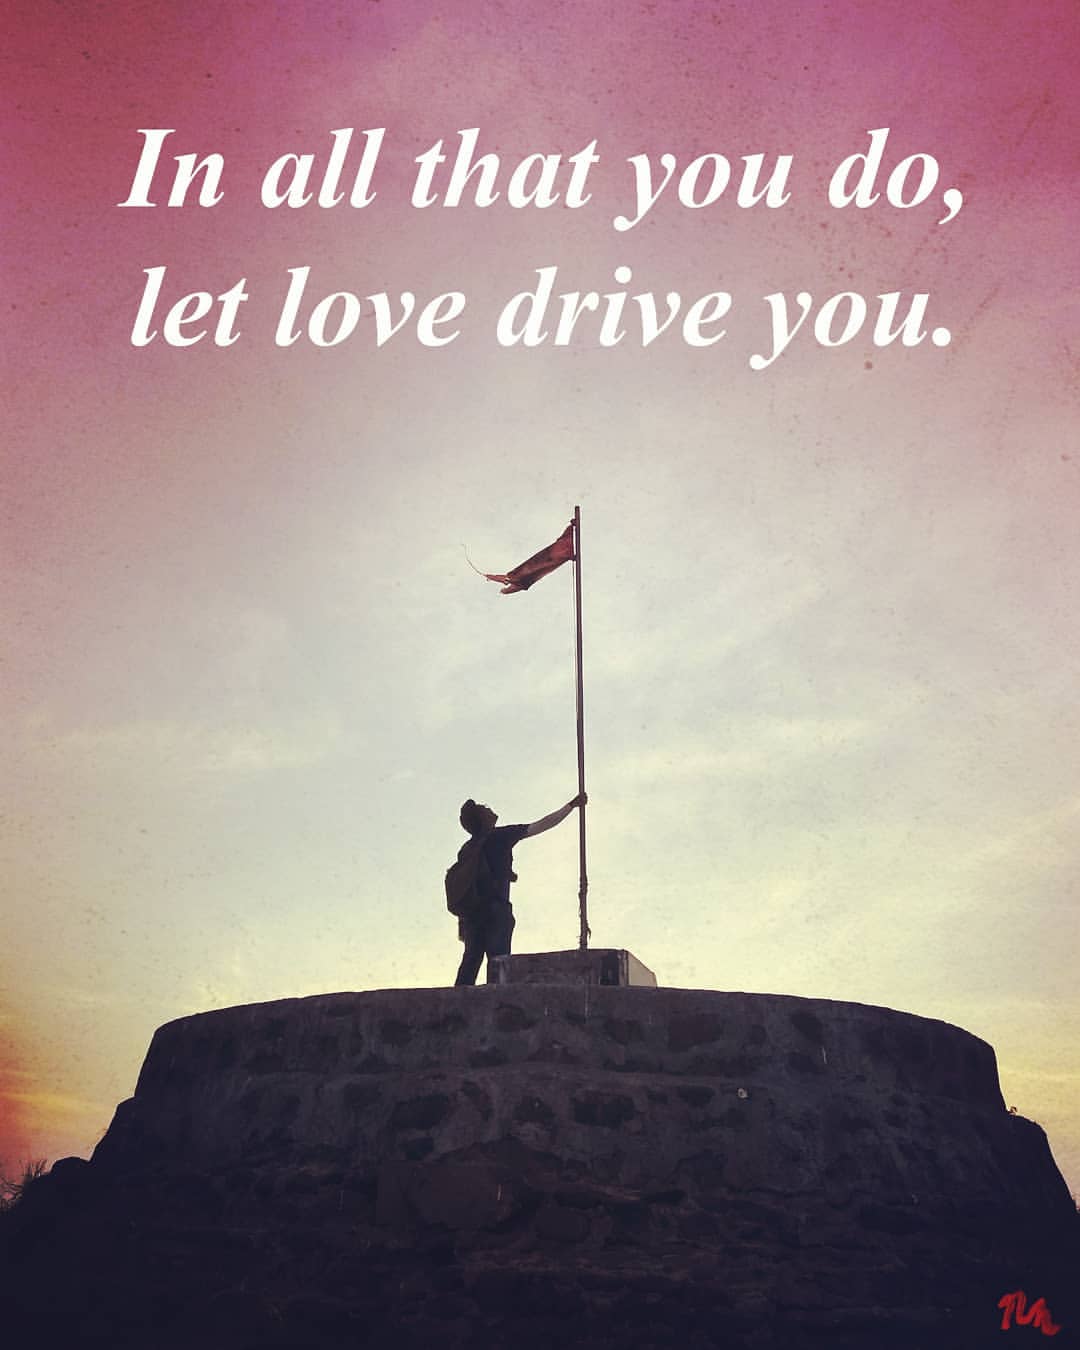 In all that you do, Let love drive you.